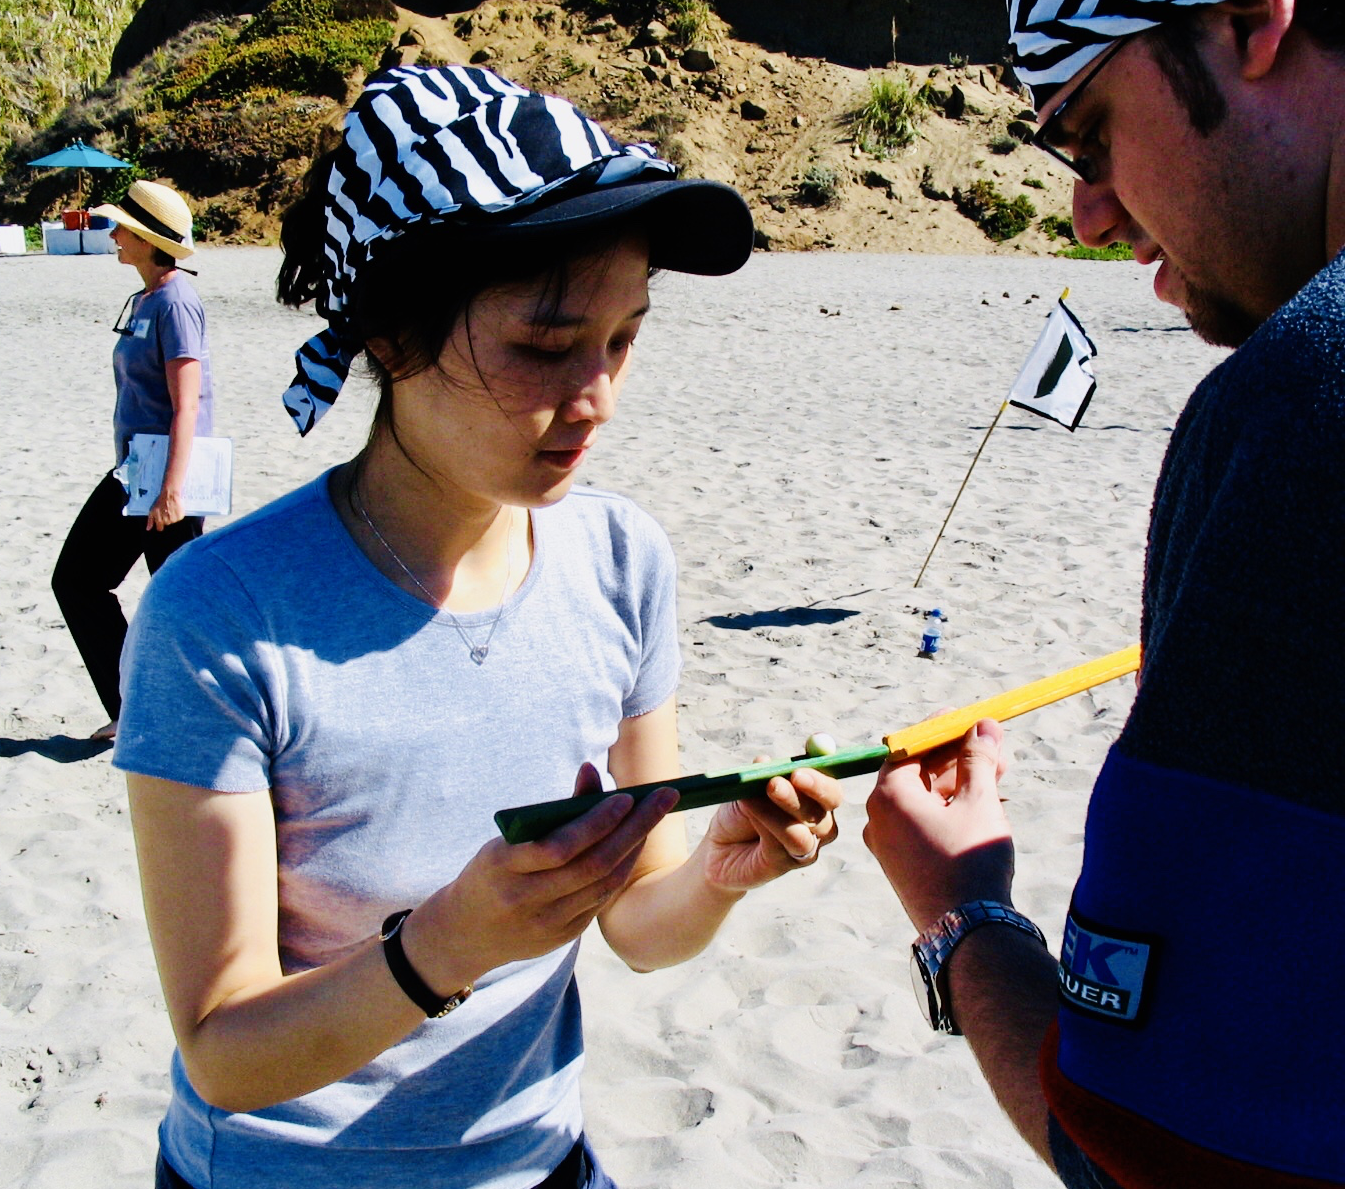 A woman analyzes a clue during a team building event on the beach